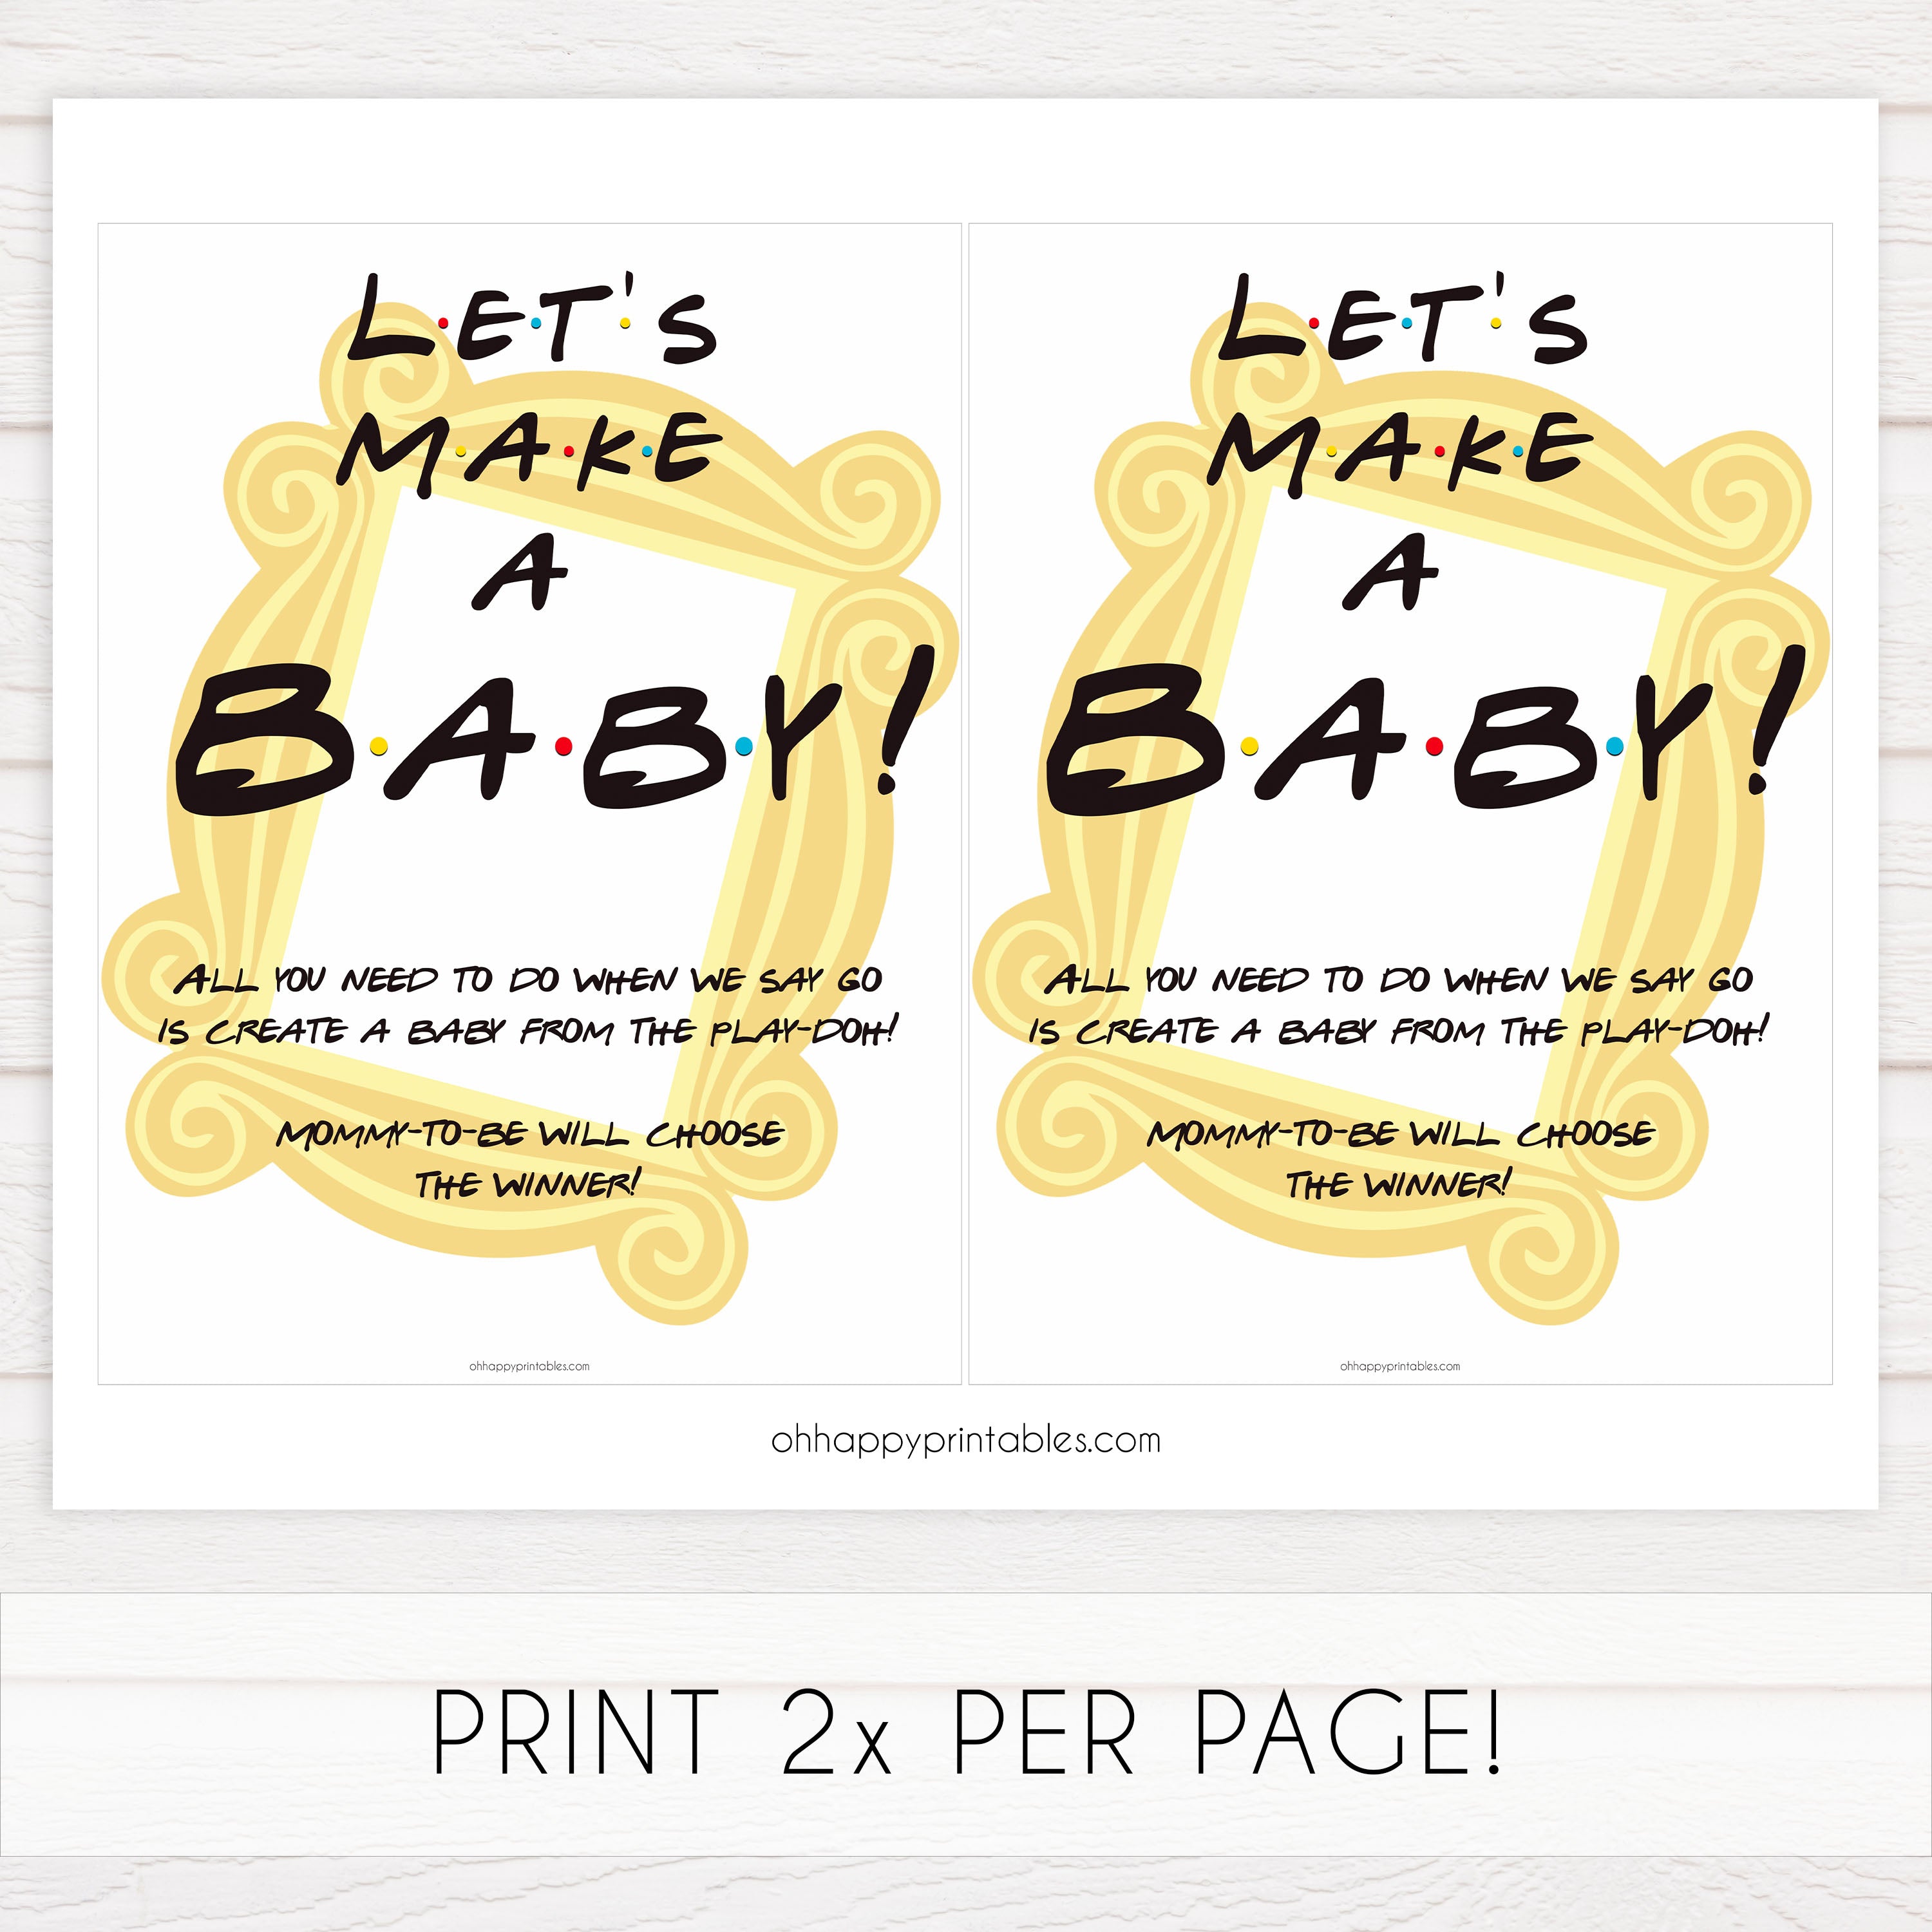 Lets make a baby game, play doh game, Printable baby shower games, friends fun baby games, baby shower games, fun baby shower ideas, top baby shower ideas, friends baby shower, friends baby shower ideas